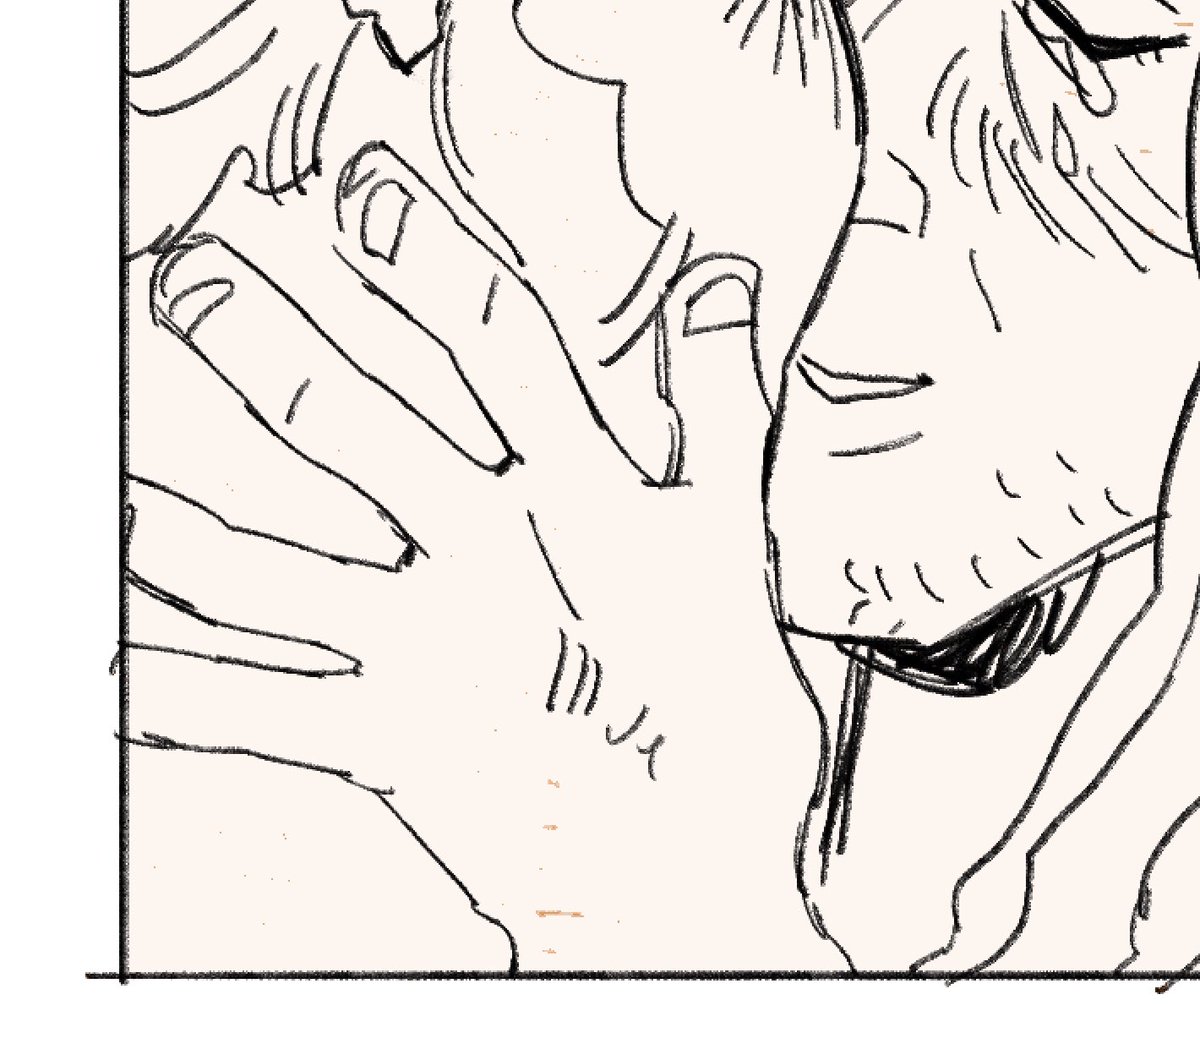 OBSESSED WITH THESE HANDS I DREW. I AM PROUD https://t.co/jhe9B8i8Lt 